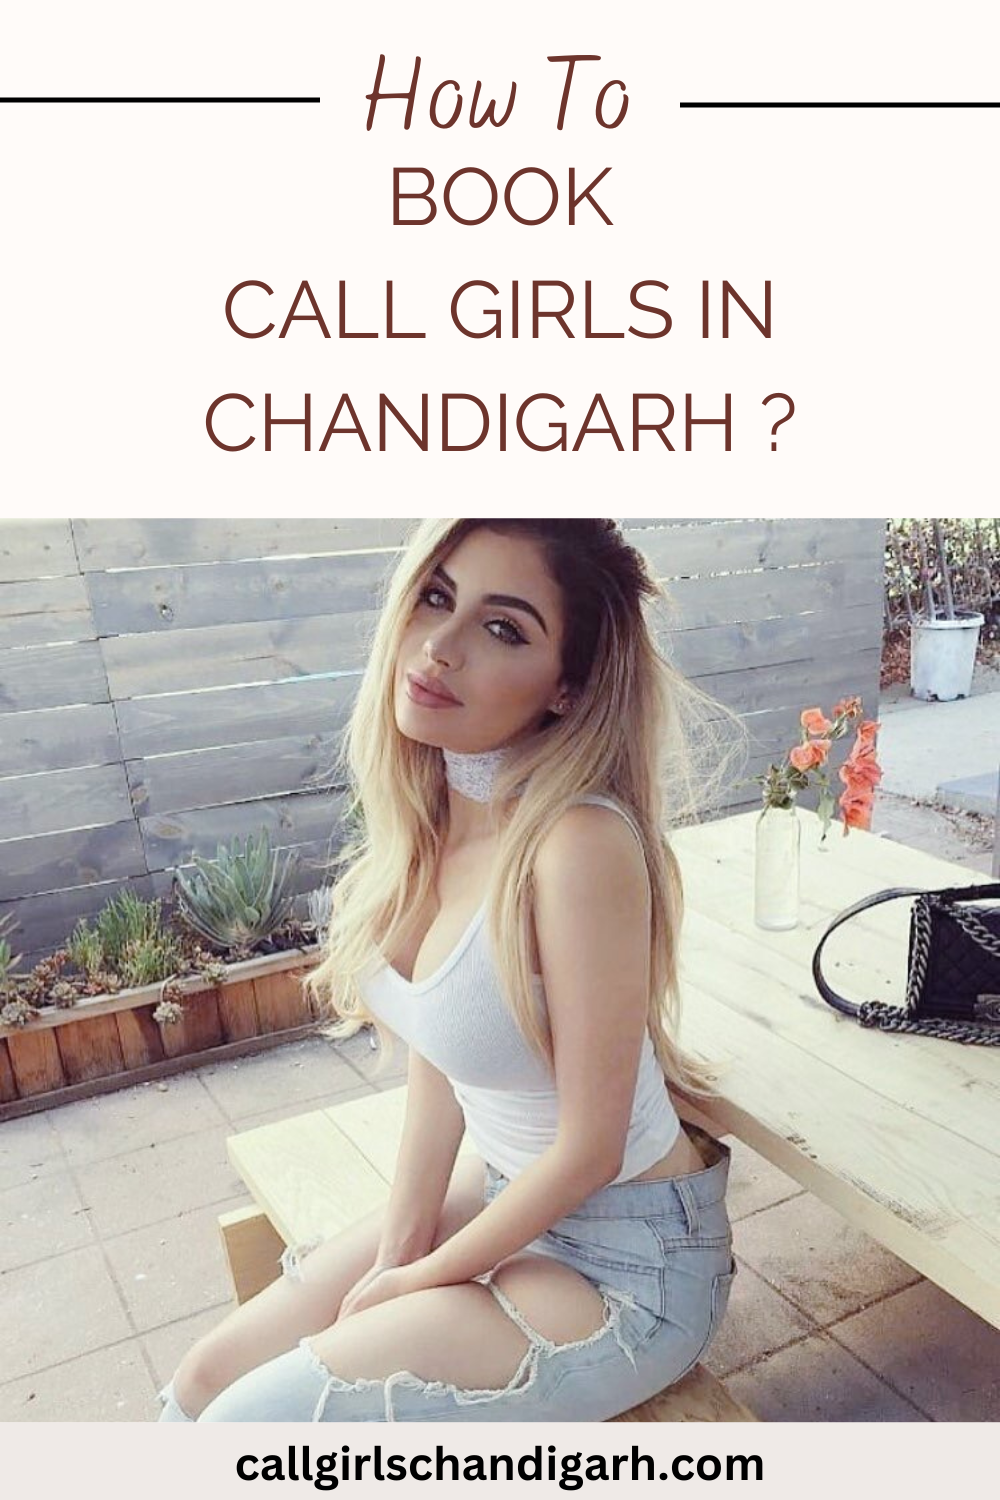 How To Book Call Girls in Chandigarh